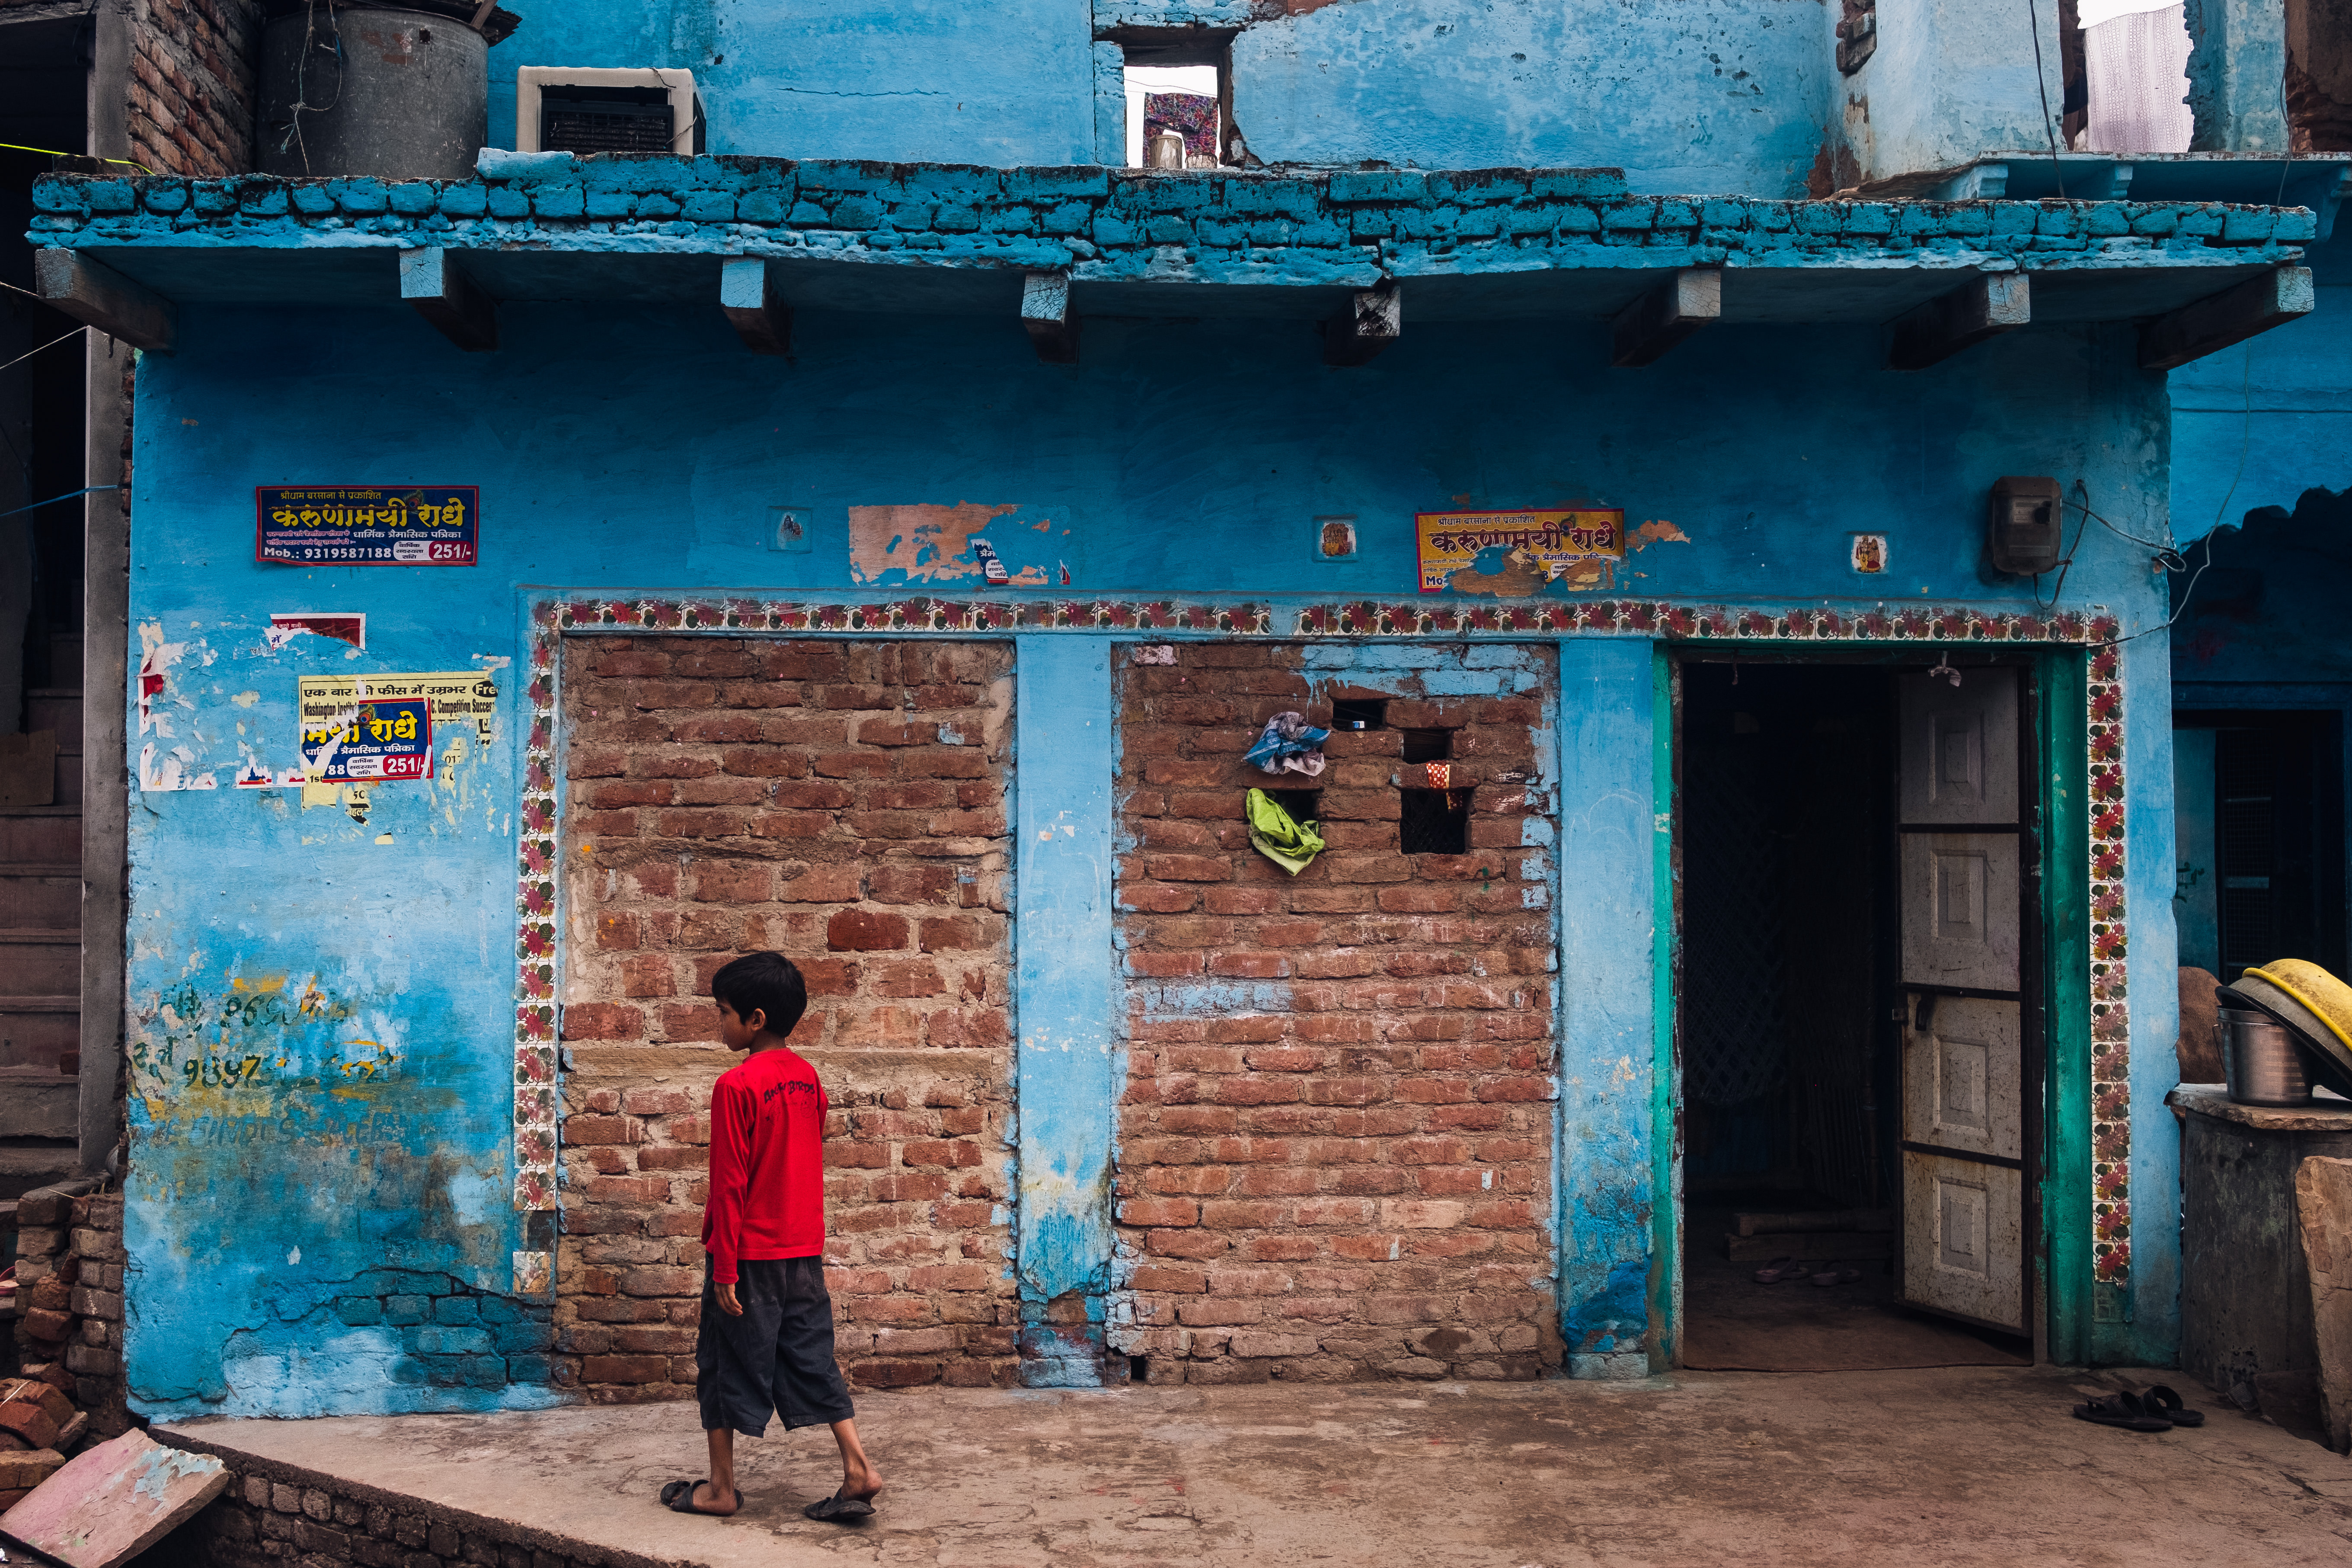 India Street Photography During Holi Festival. Boy in red walks in front of blue wall. Images by Jason Vinson